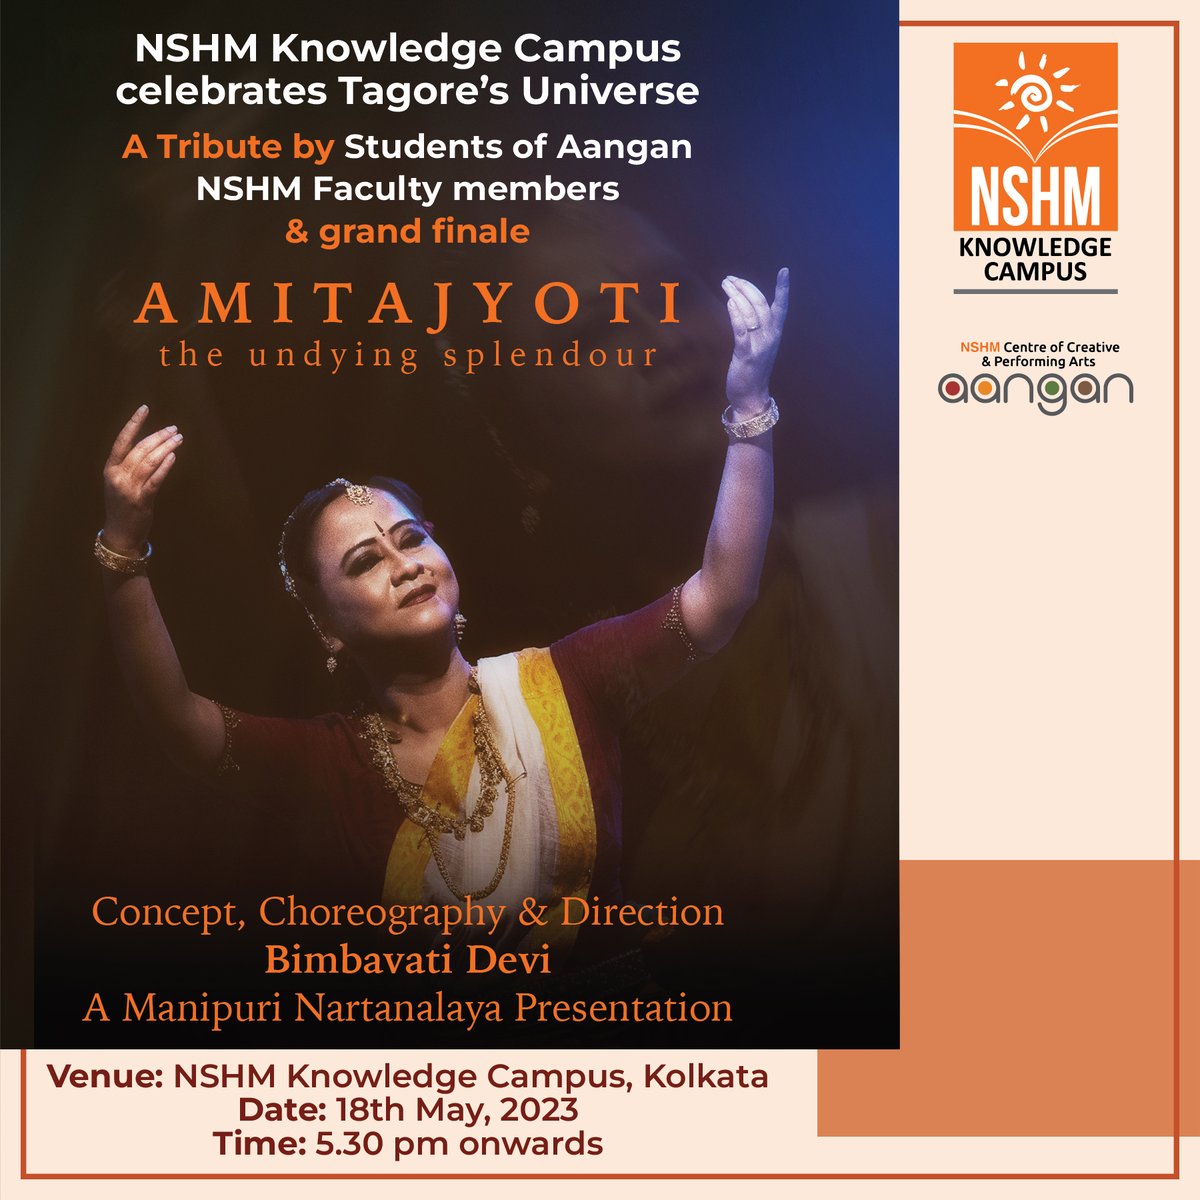 Join us for an enchanting evening celebrating artistic brilliance! Bimbavati Devi, her troupe will captivate you with their mesmerizing Manipuri dance.

Don't miss out on this extraordinary showcase of creativity at Aangan's unique event. See you there!

#PerformingArts #Culture